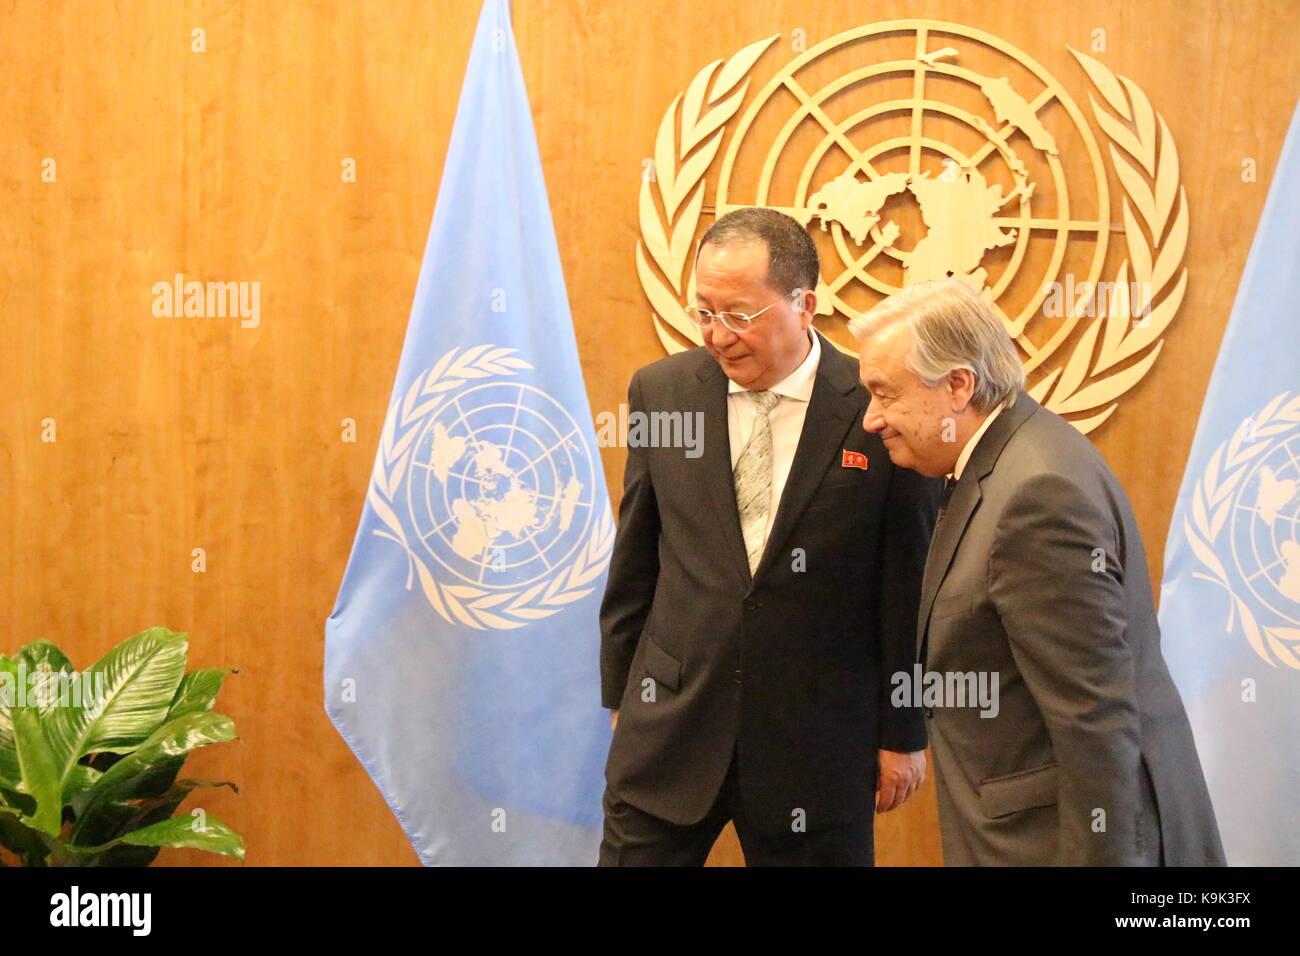 UN, New York, USA. 23rd Sept, 2017. North Korea's Foreign Minister Ri Yong Ho met UN Sec-Gen Antonio Guterres amid mounting tensions on the Korea Peninsula. Photo: Matthew Russell Lee / Inner City Press Stock Photo